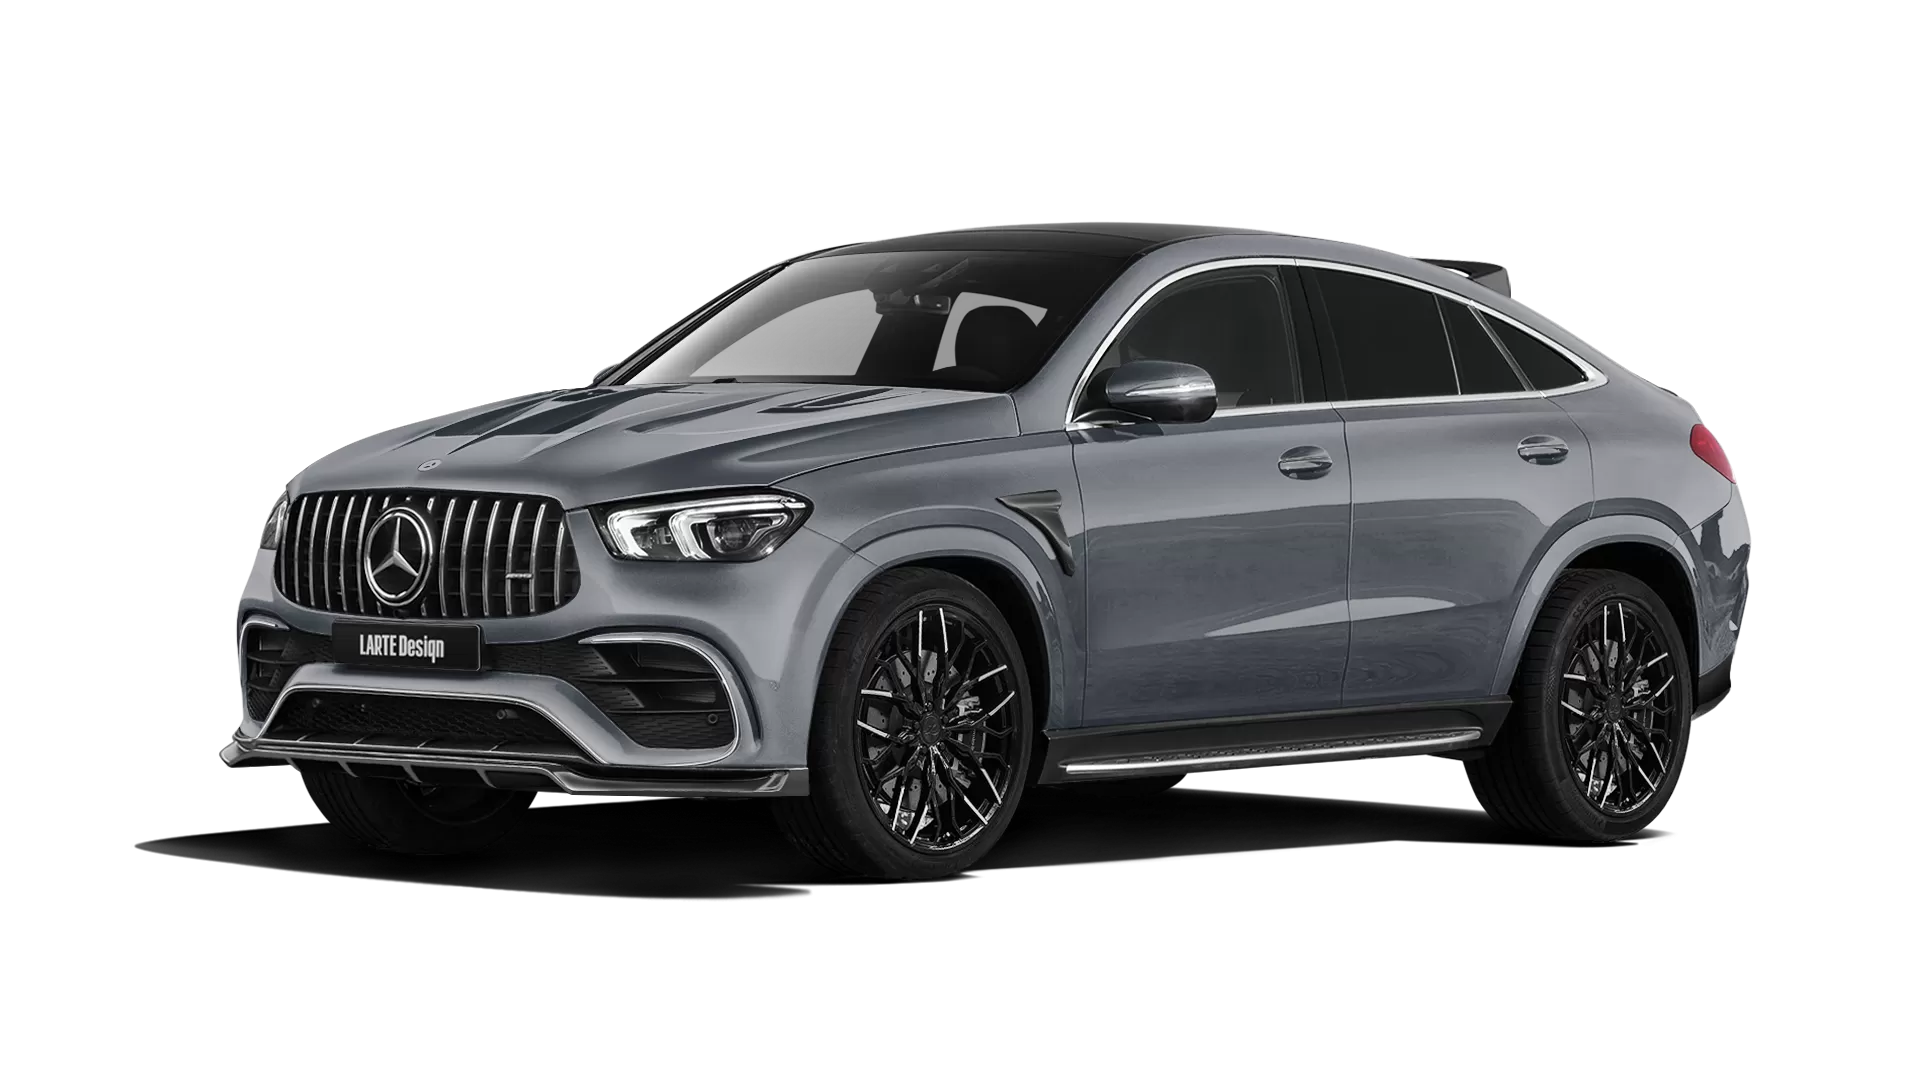 Mercedes GLE Coupe AMG 63 C167 with painted body kit: front view shown in Selenite Grey